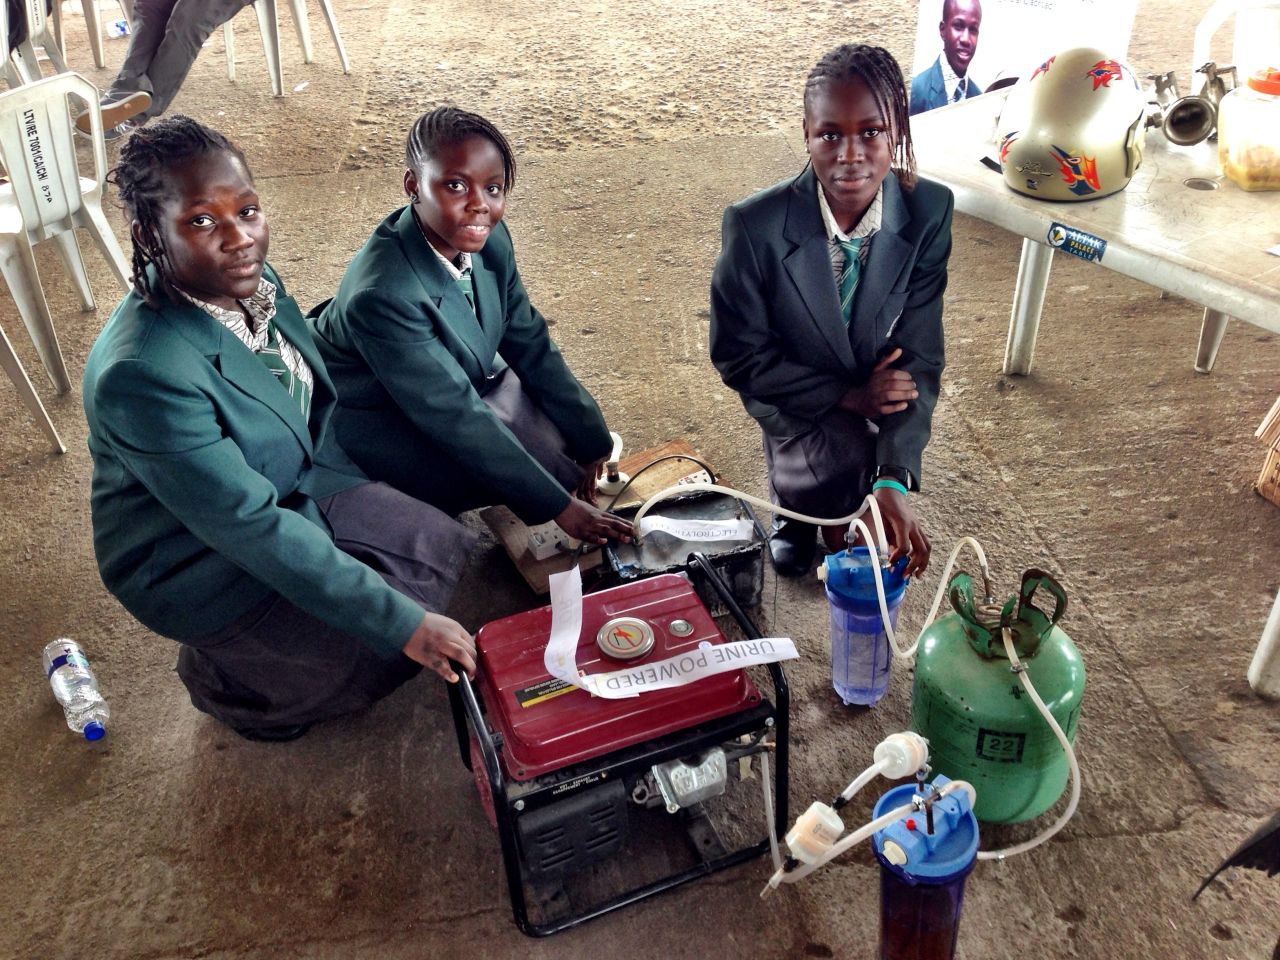 Similar initiatives are taking place in other parts of the continent. In Nigeria, these teenagers have created a urine powered generator which provides six hours of electricity.